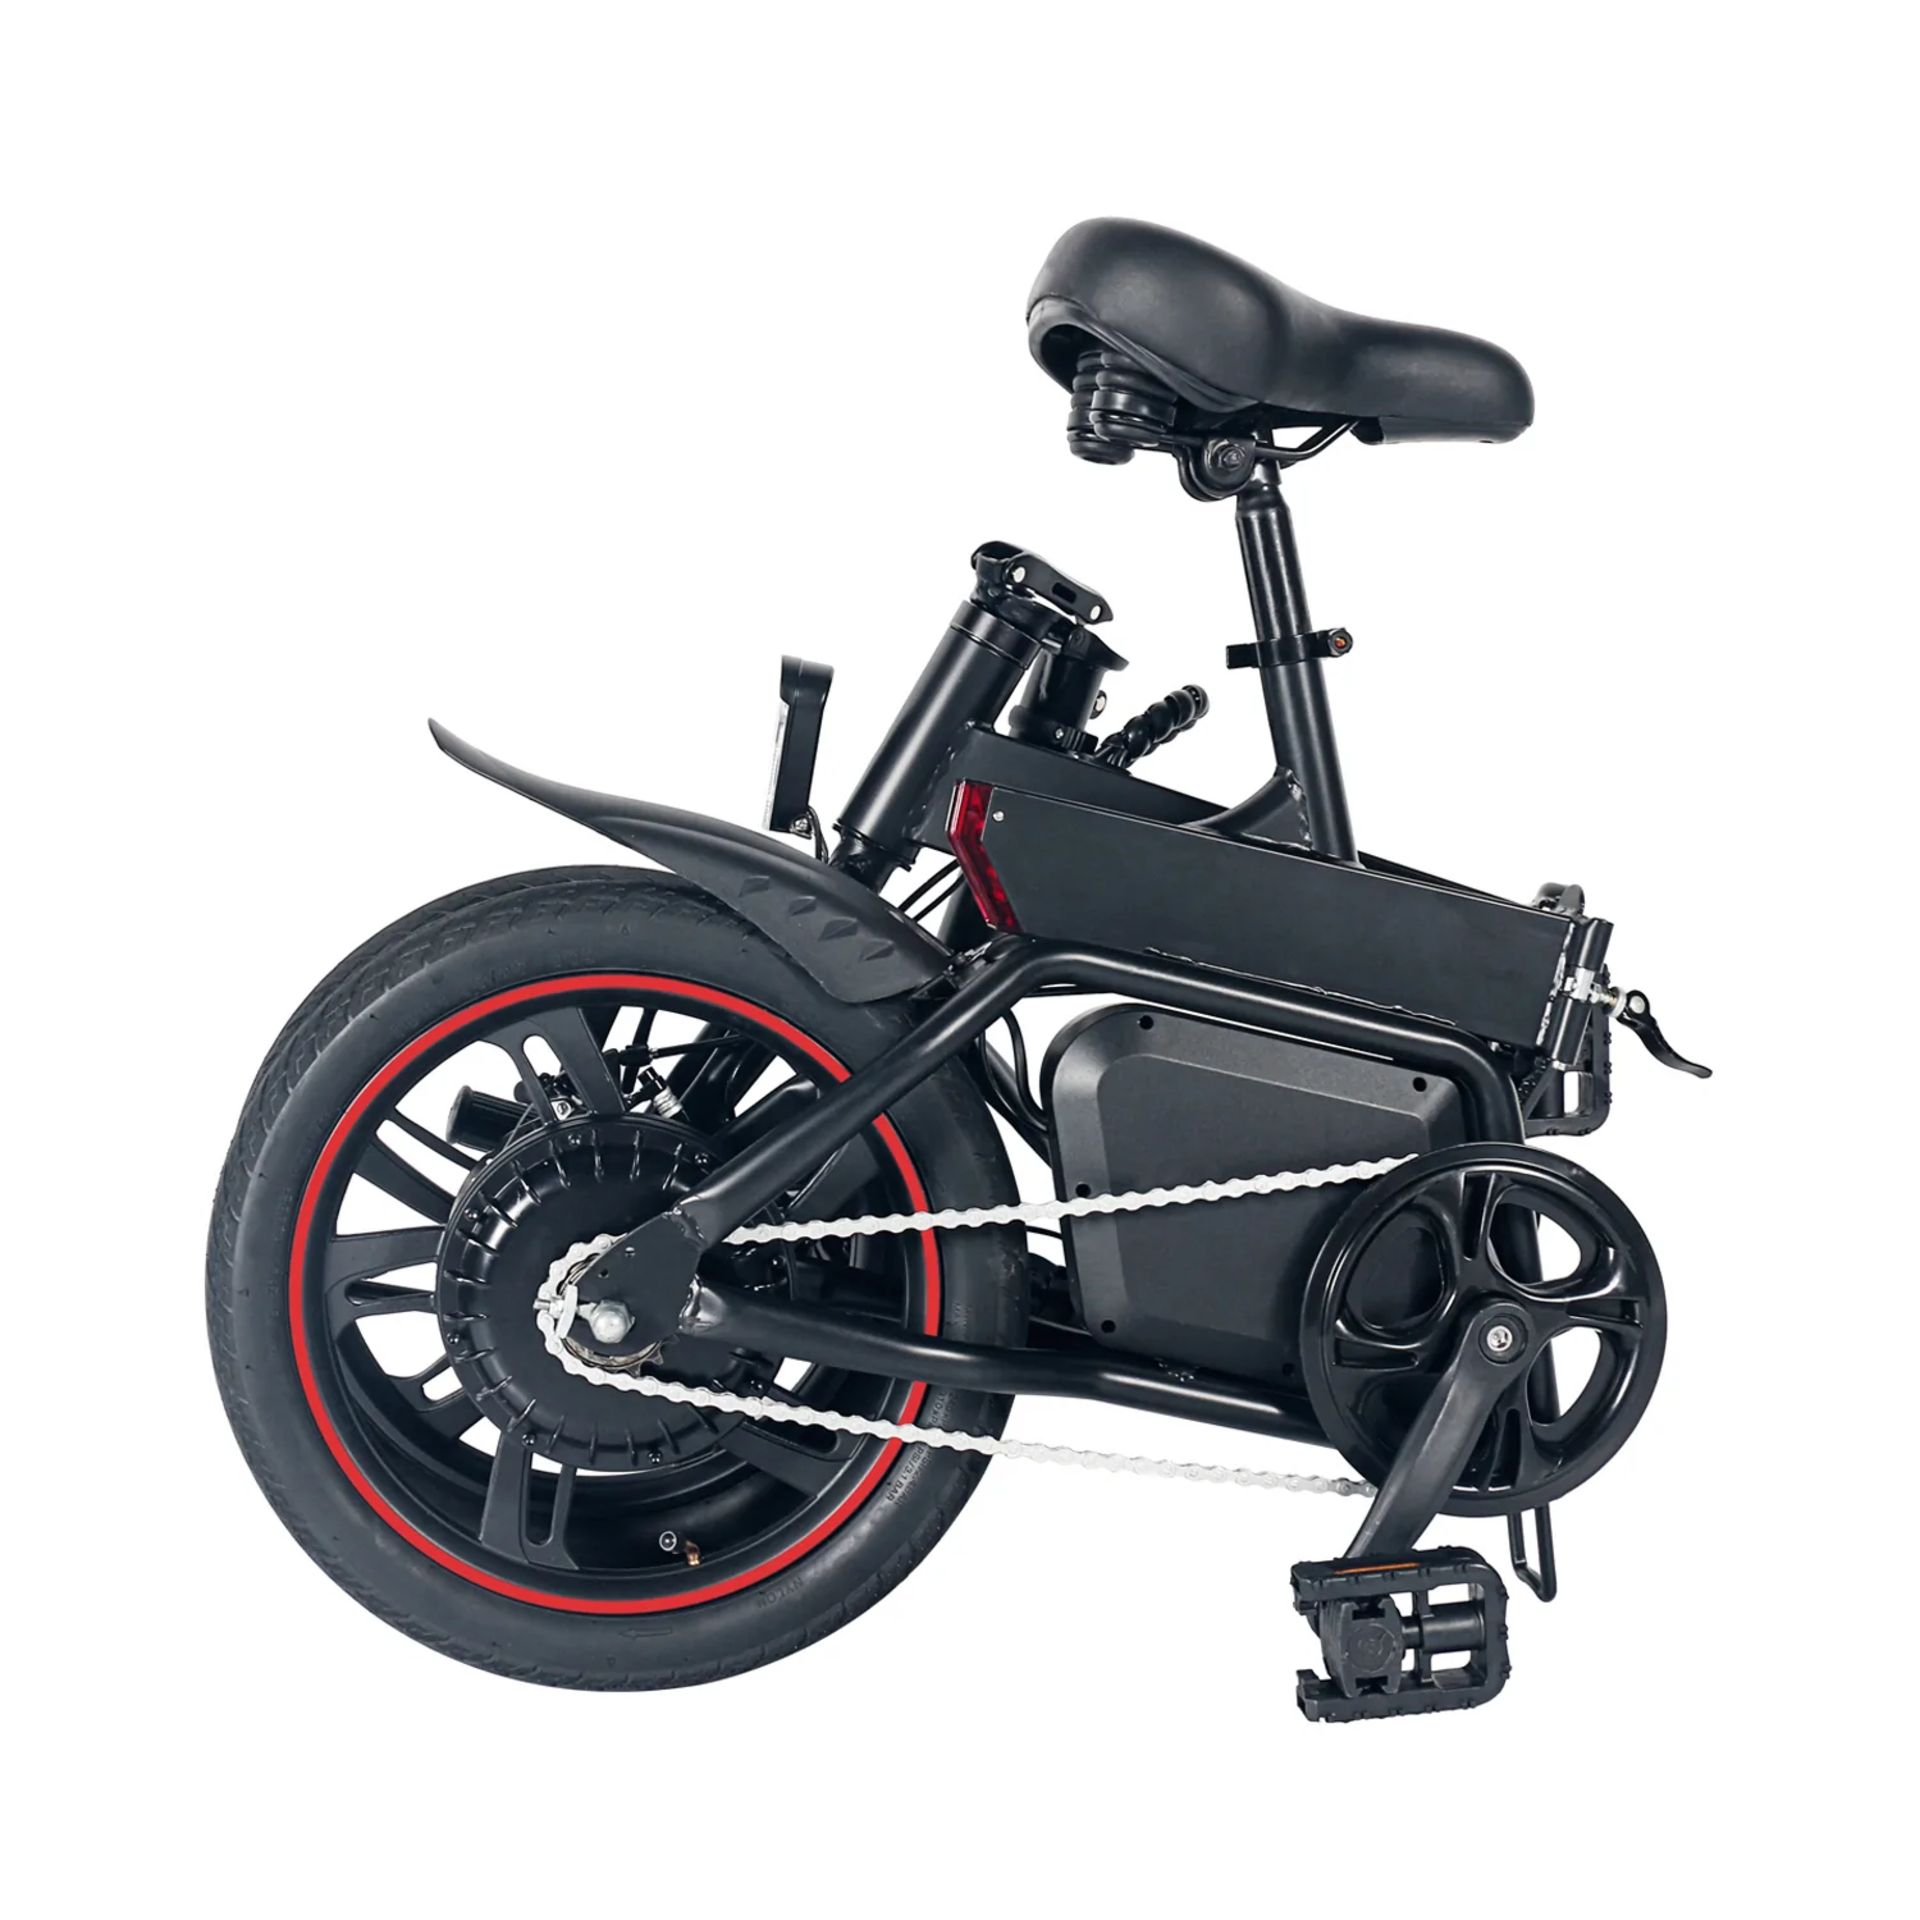 5 X Windgoo B20 Pro Electric Bike. RRP £1,100.99. With 16-inch-wide tires and a frame of upgraded - Bild 7 aus 7